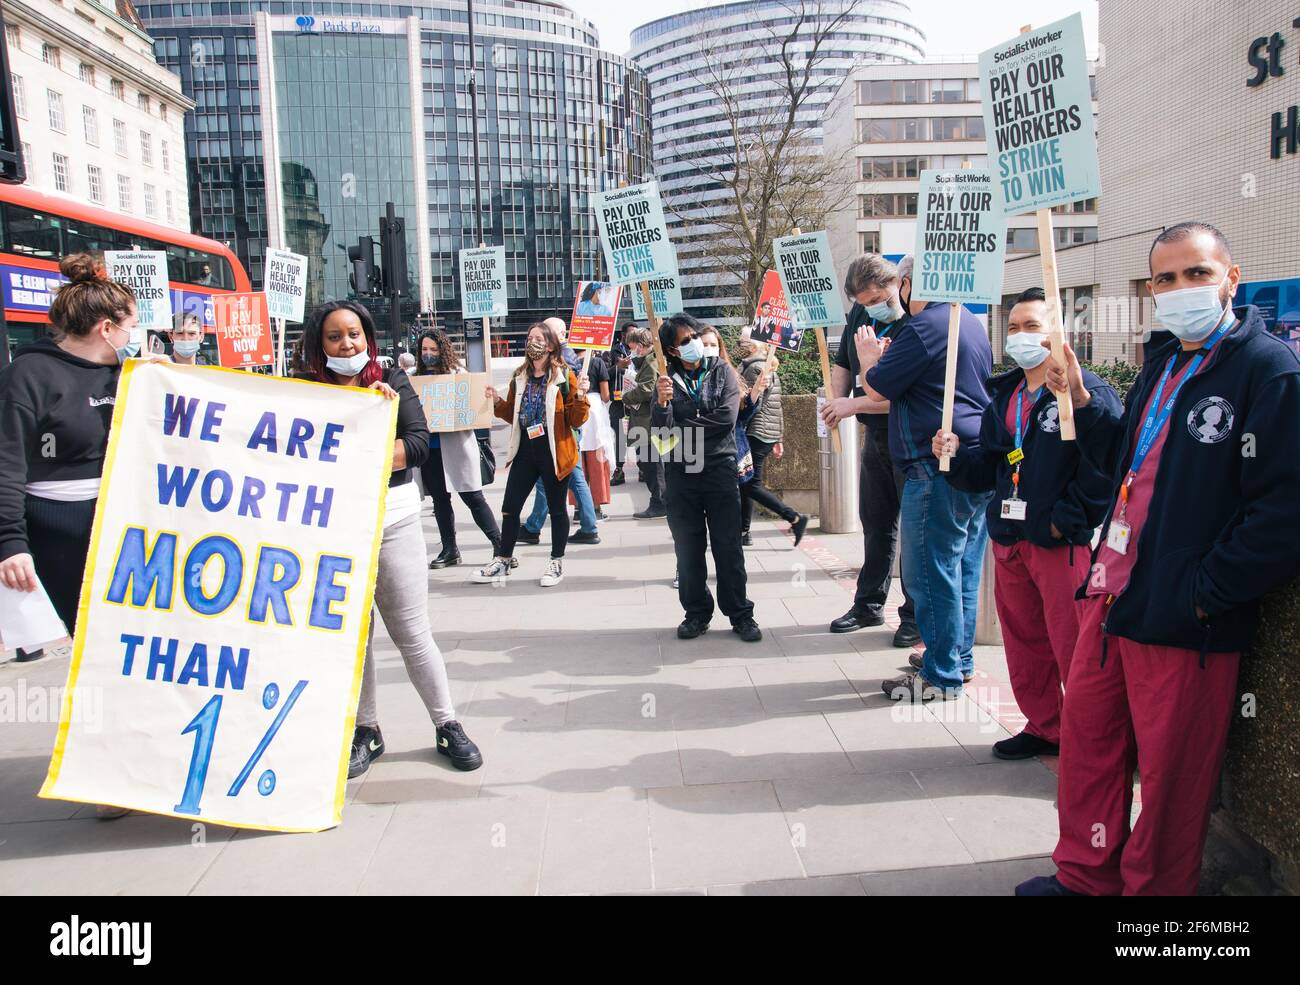 St Thomas's Hospital, London, UK 1st April 2021. NHS staff protest against the offer of a 1% pay rise Credit: Denise Laura Baker/Alamy Live News Stock Photo